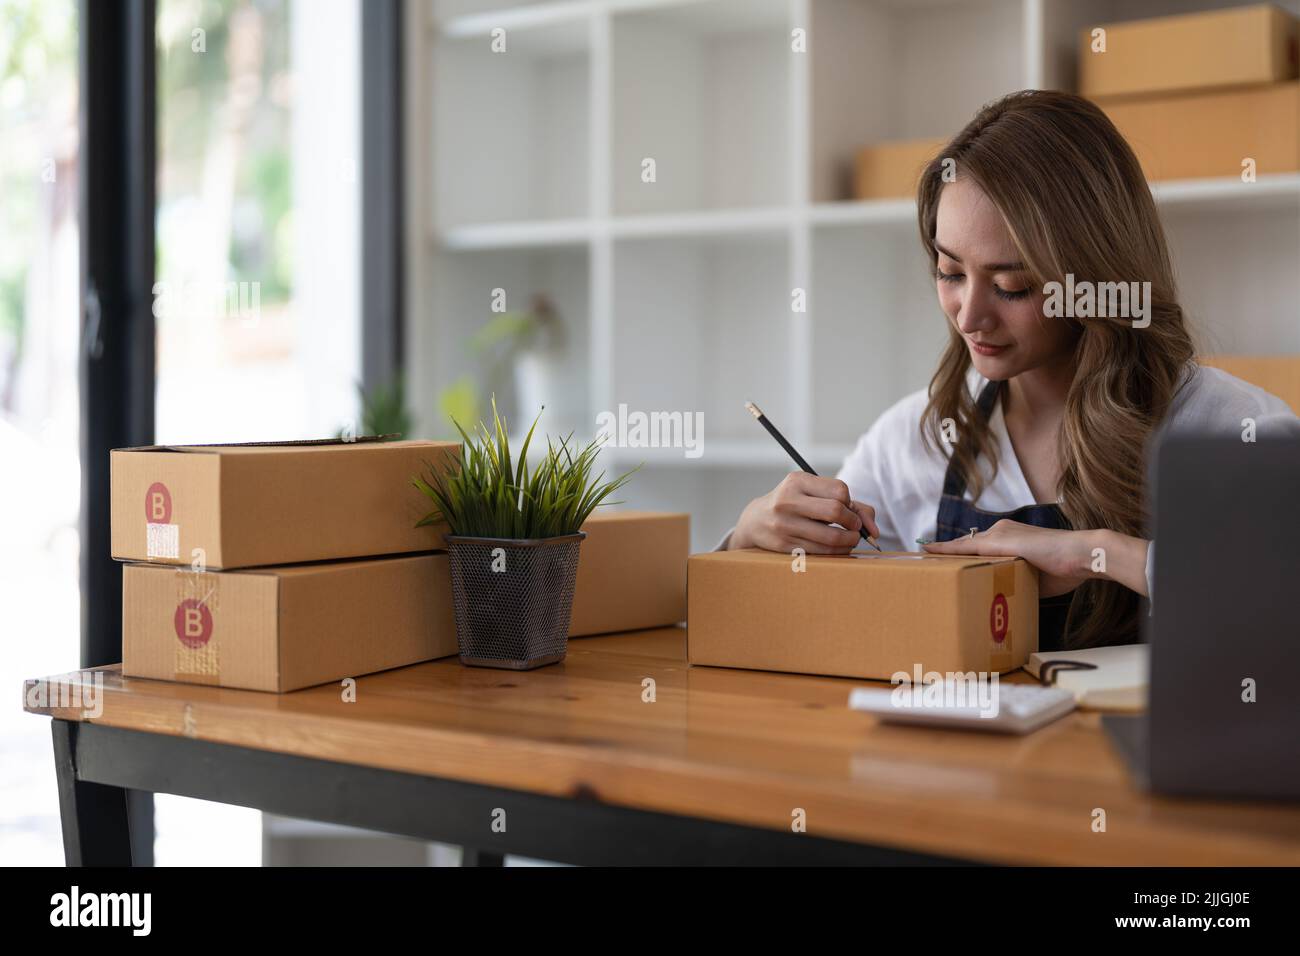 Starting Small business entrepreneur SME freelance, Portrait young woman working at home office, BOX, smartphone, laptop, online, marketing, packaging Stock Photo